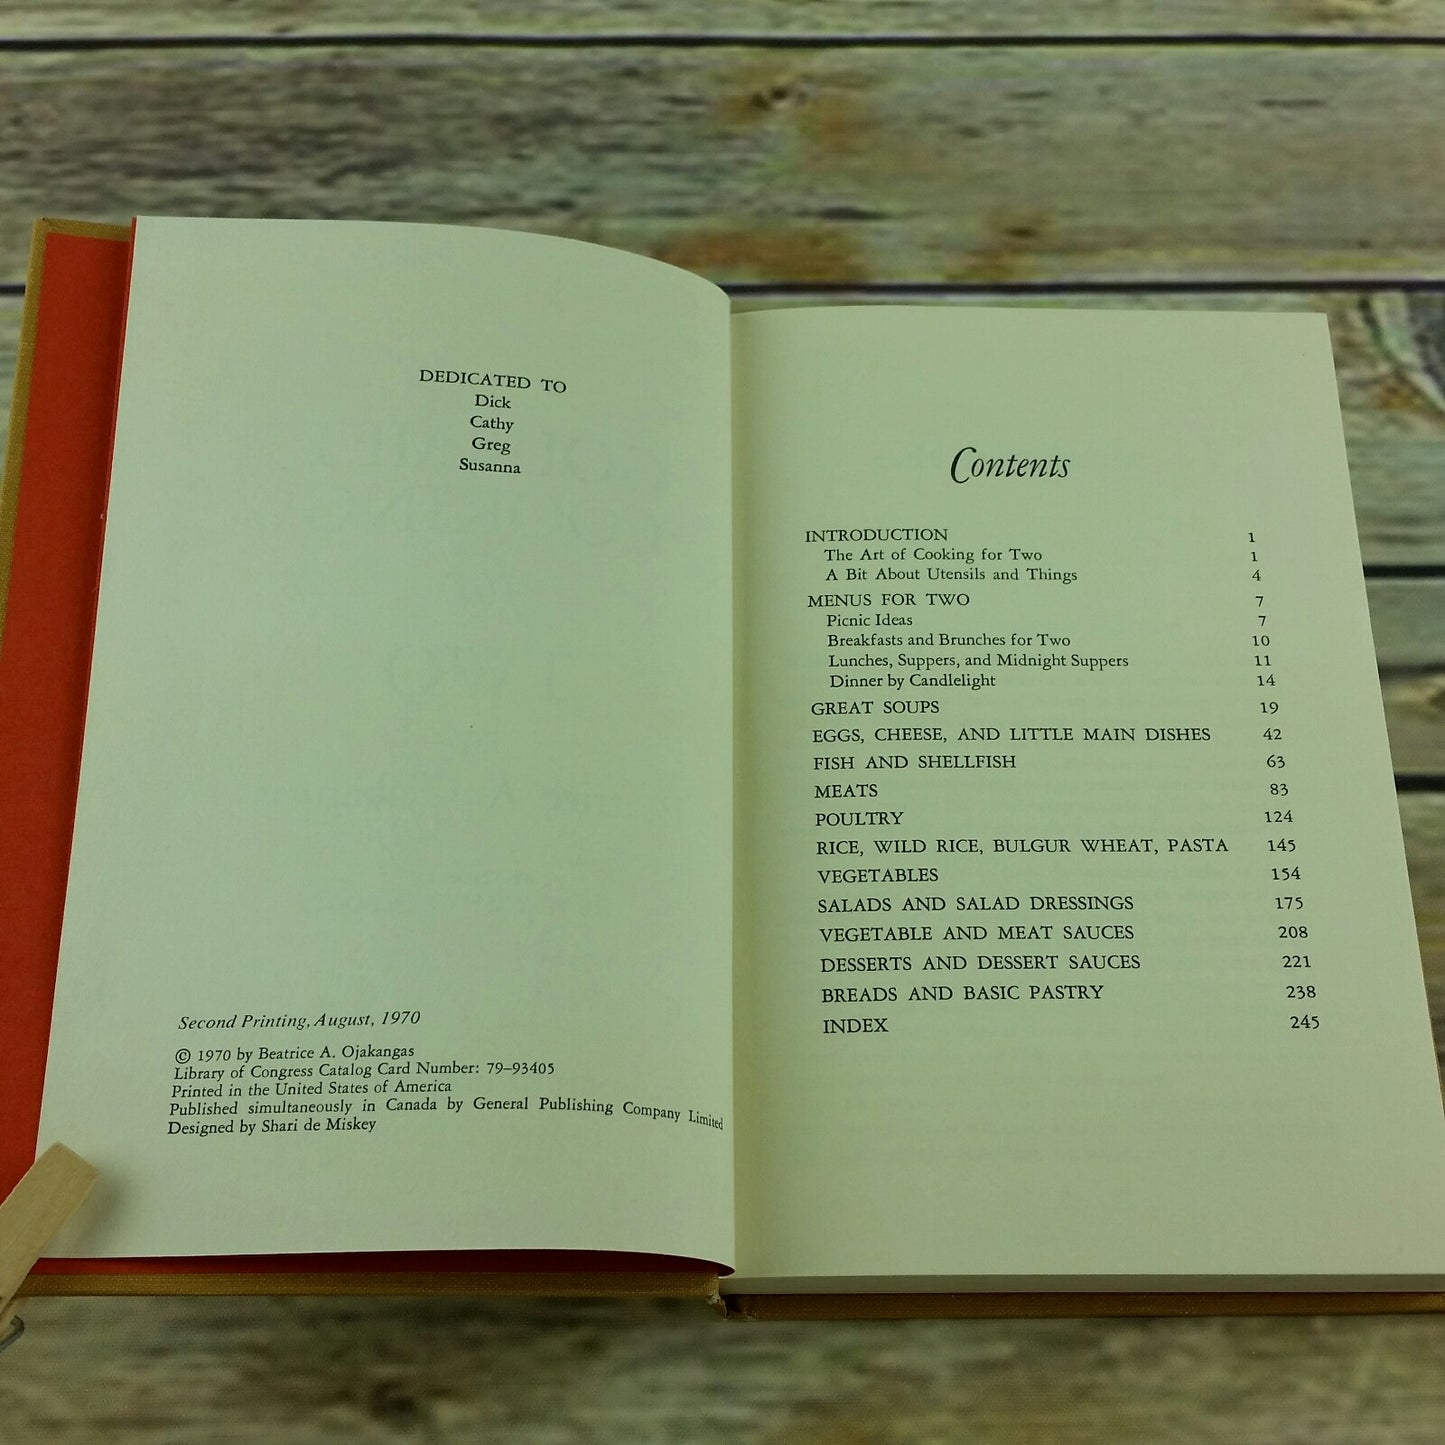 Vintage Cookbook Gourmet Cooking for Two Recipes 1970 Beatrice Ojakanagas - At Grandma's Table